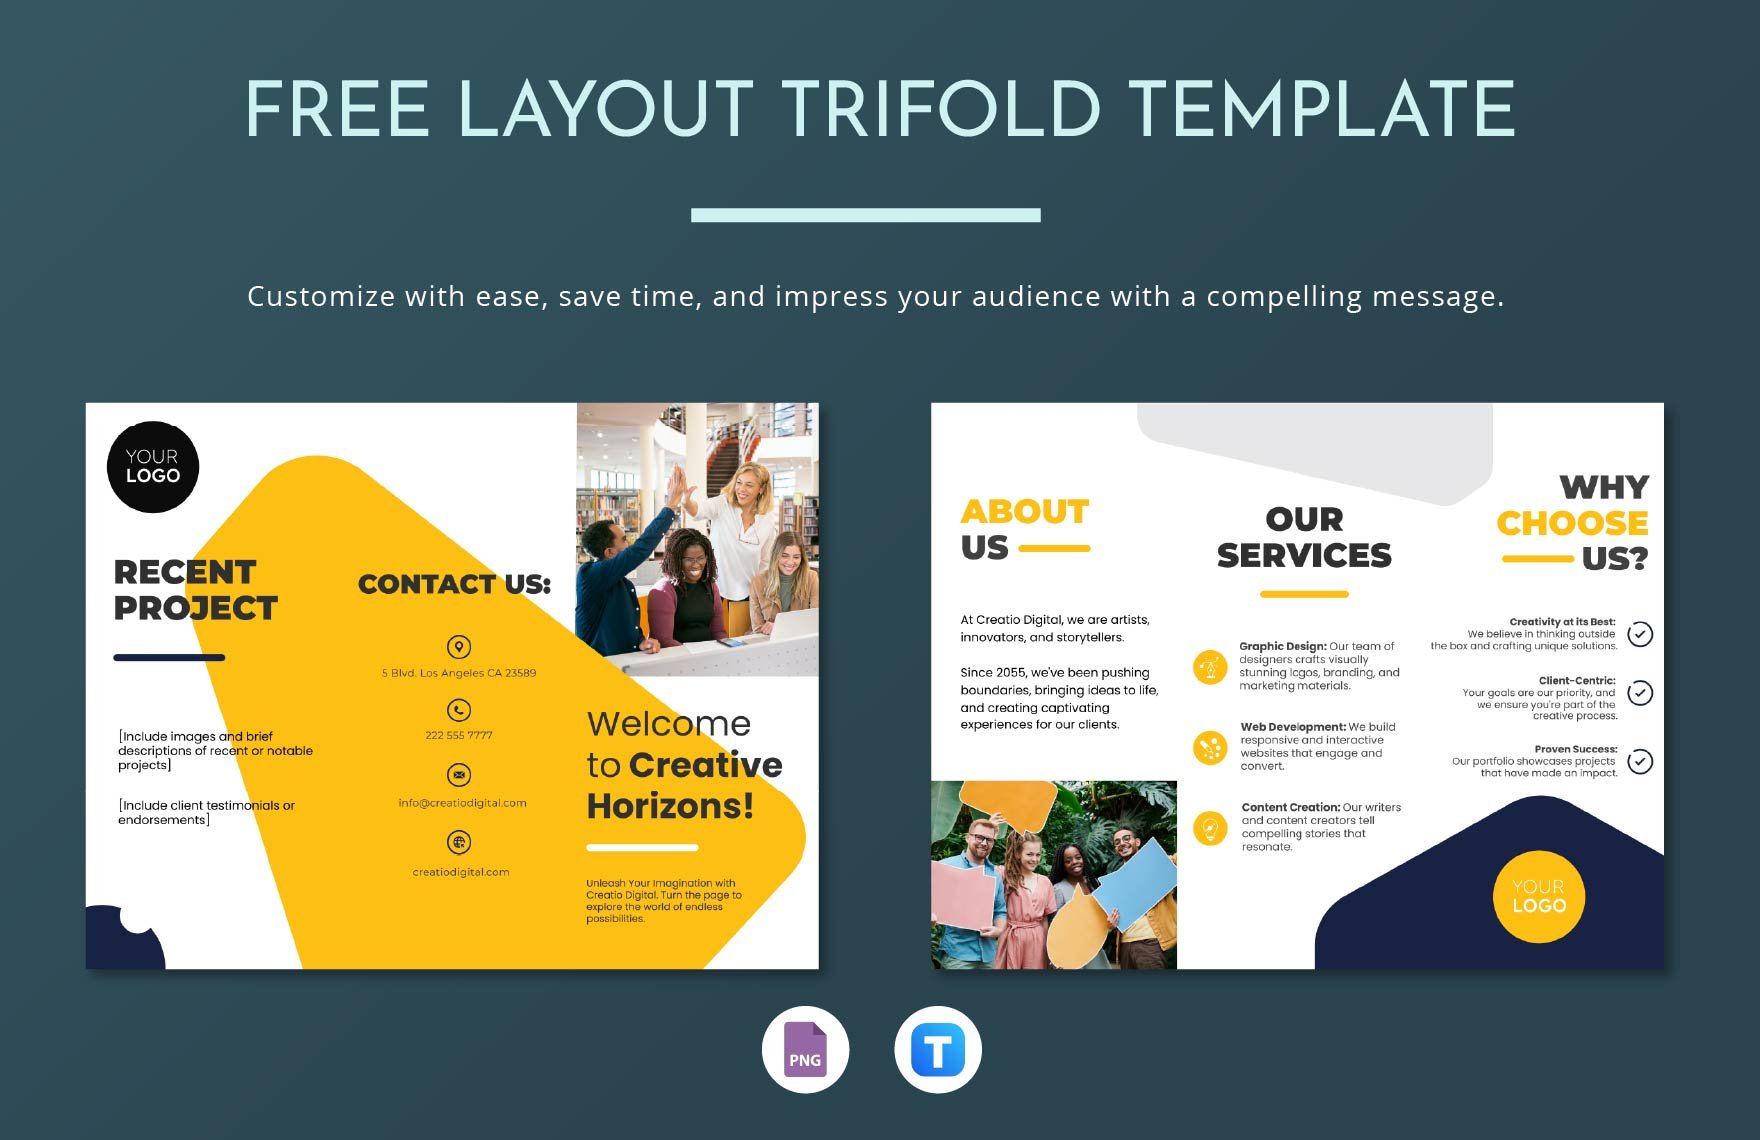 Free Layout Trifold Template